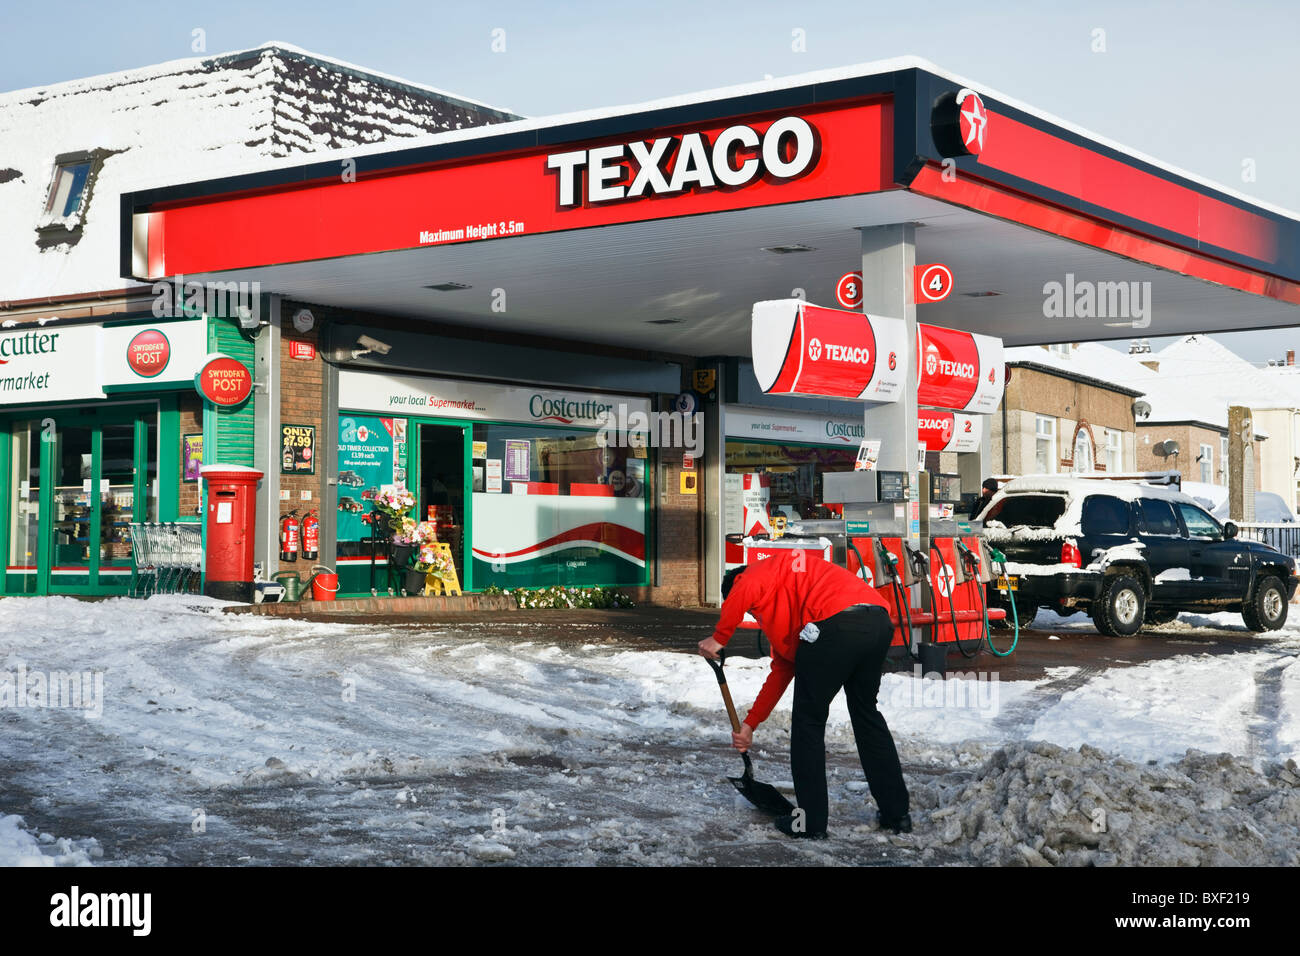 Man shovelling clearing snow from a Texaco petrol filling station forecourt after snowfall in bad winter weather. UK, Britain Stock Photo